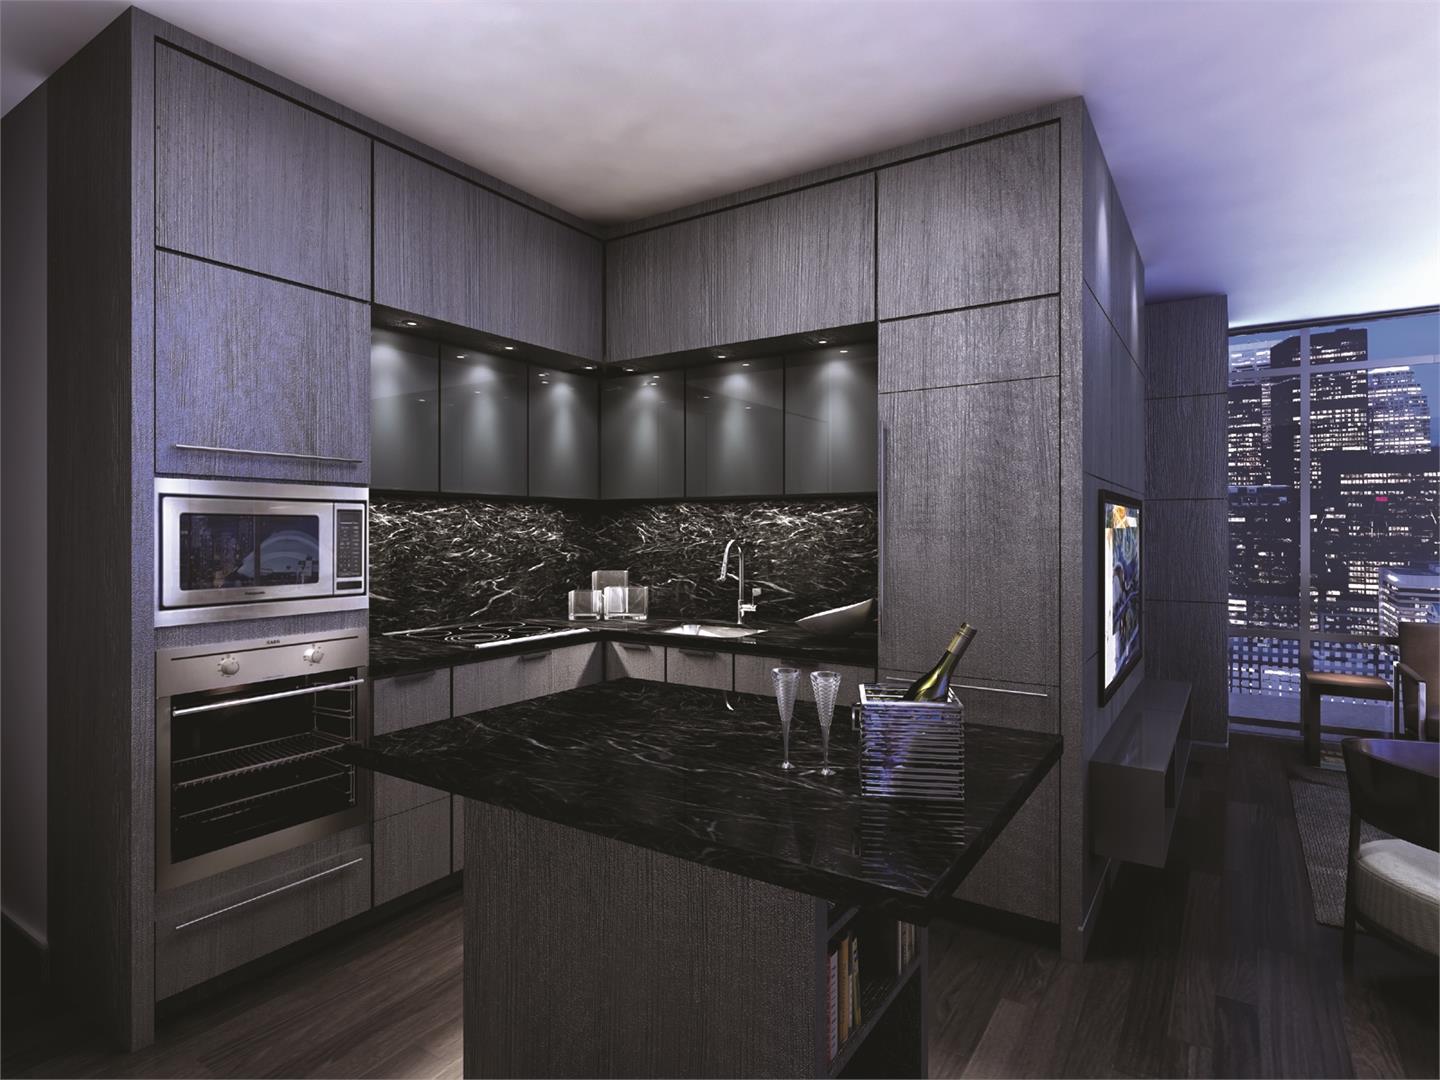 So here we see a 3d image of a typical King Blue kitchen.